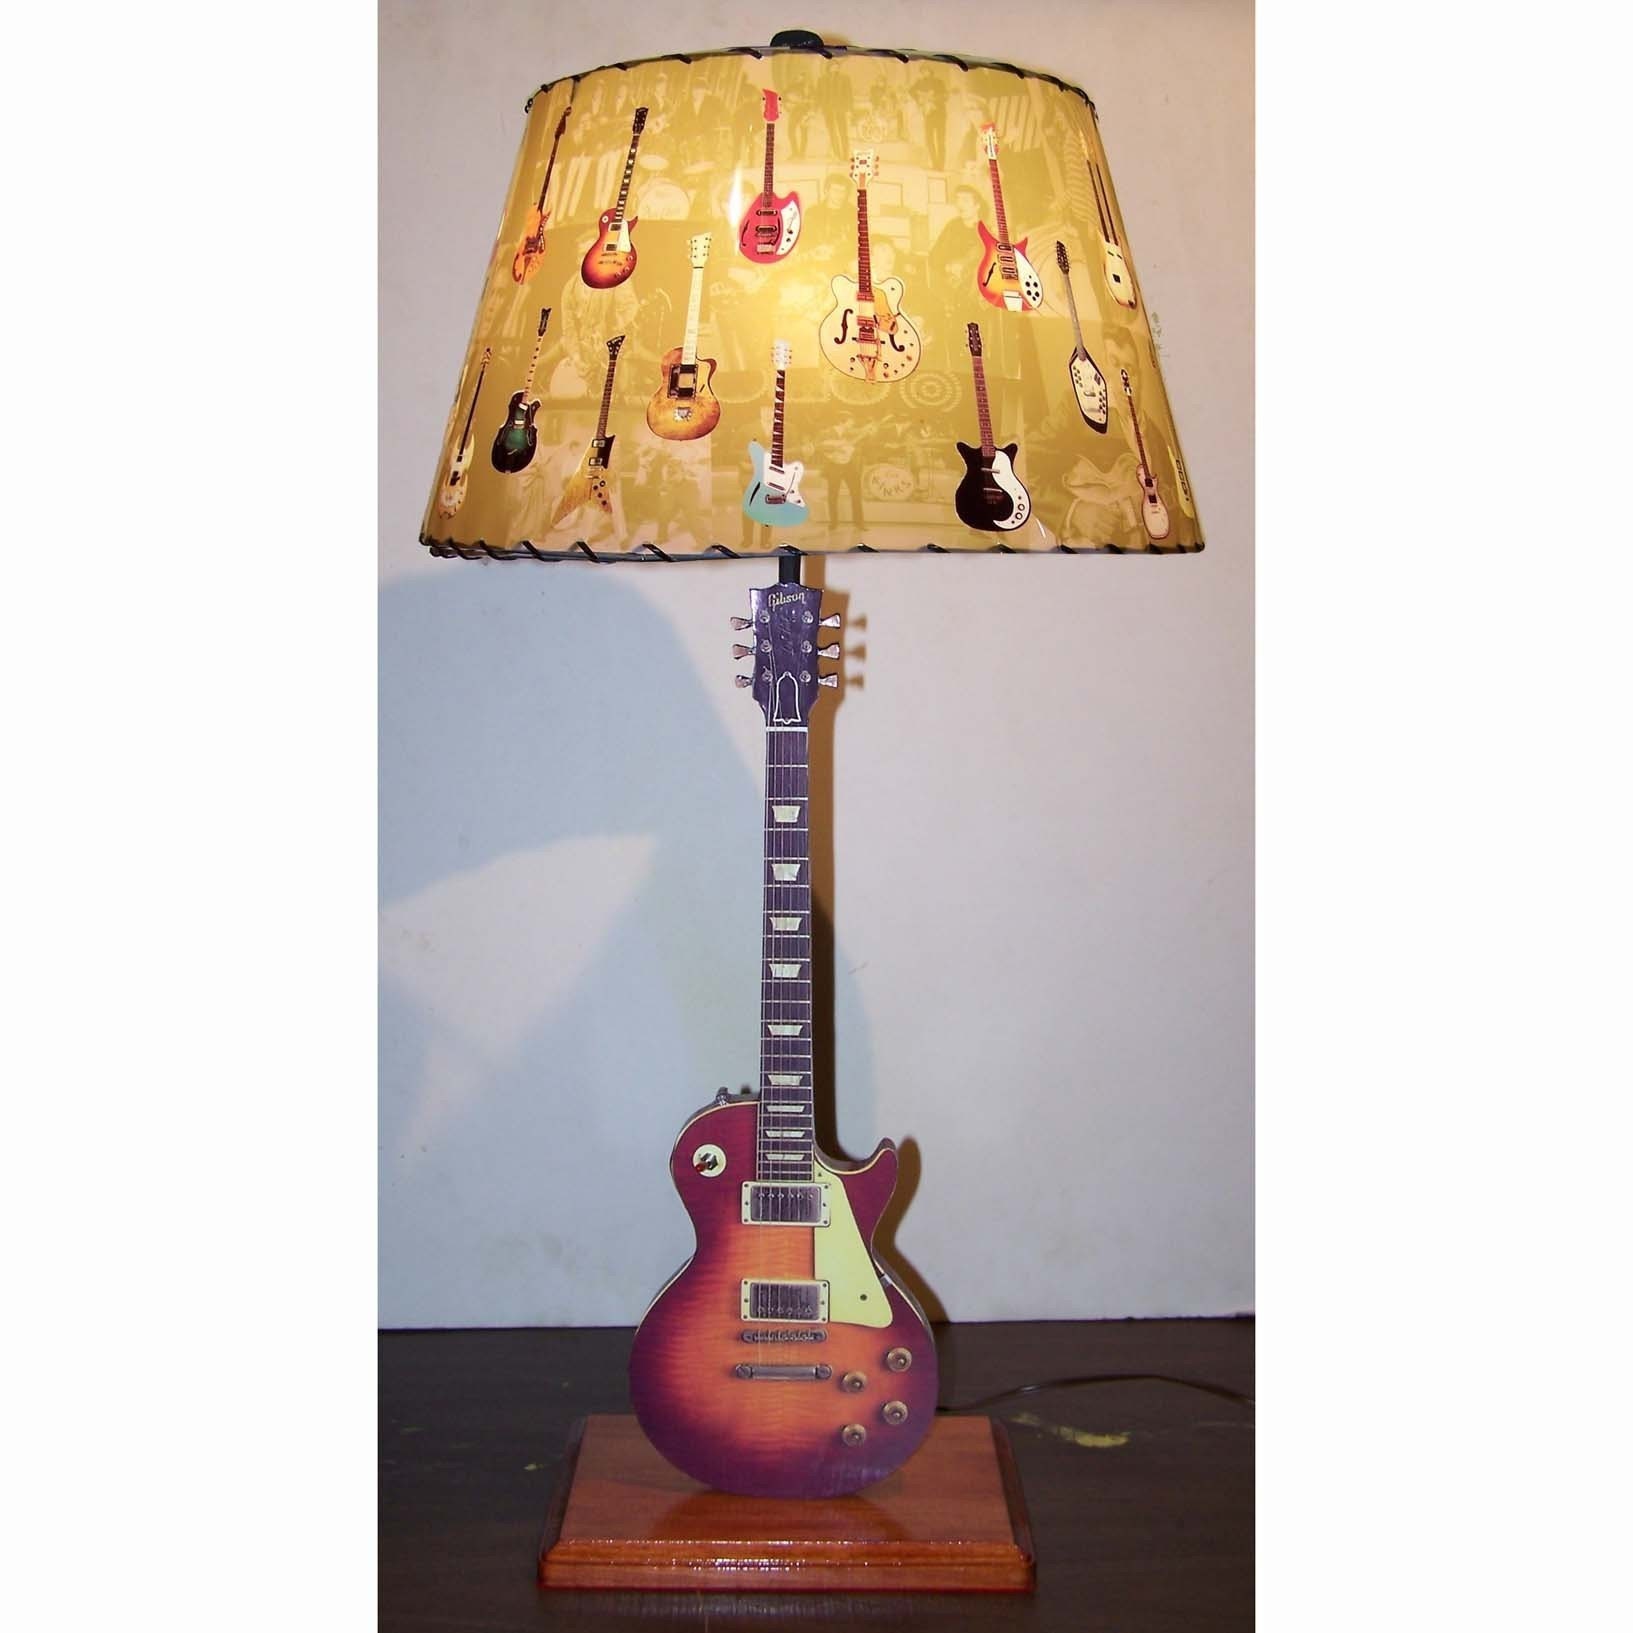 Antique Lamp Shades on Guitar Lamp And Lamp Shade Vintage Les Paul By Creativepal On Etsy